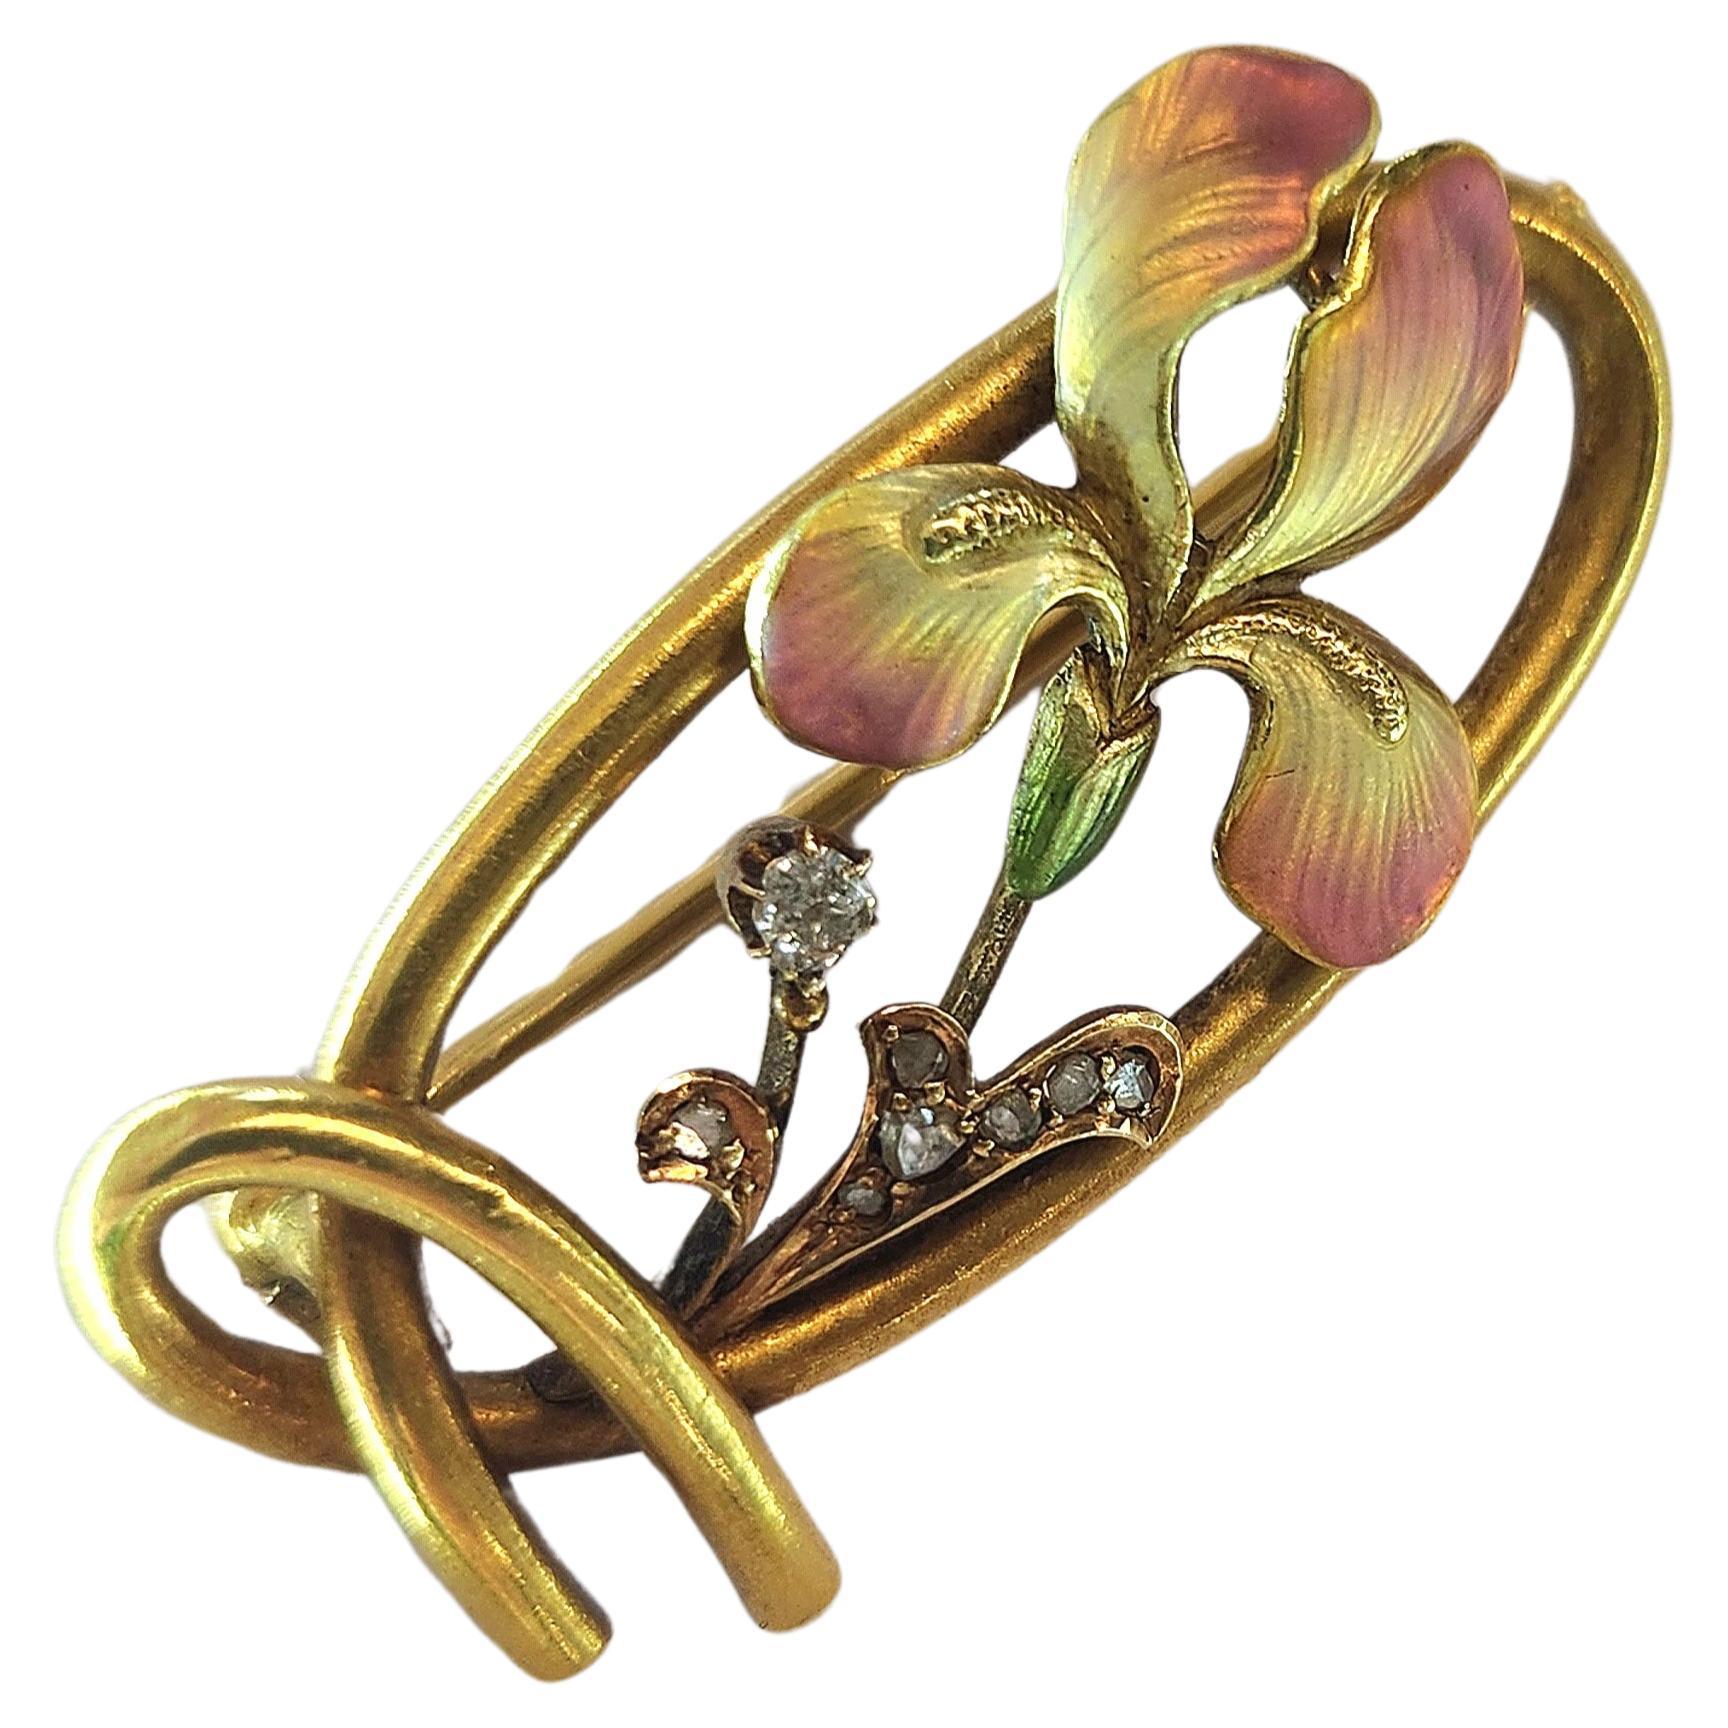 Antique 18k yello gold brooch in art nouvaeu style 1900s floral design with colorful enamel and old mine cut diamonds hall marked 18k gold standard dates back to europe the art nouvaeu era 1900/1910.c